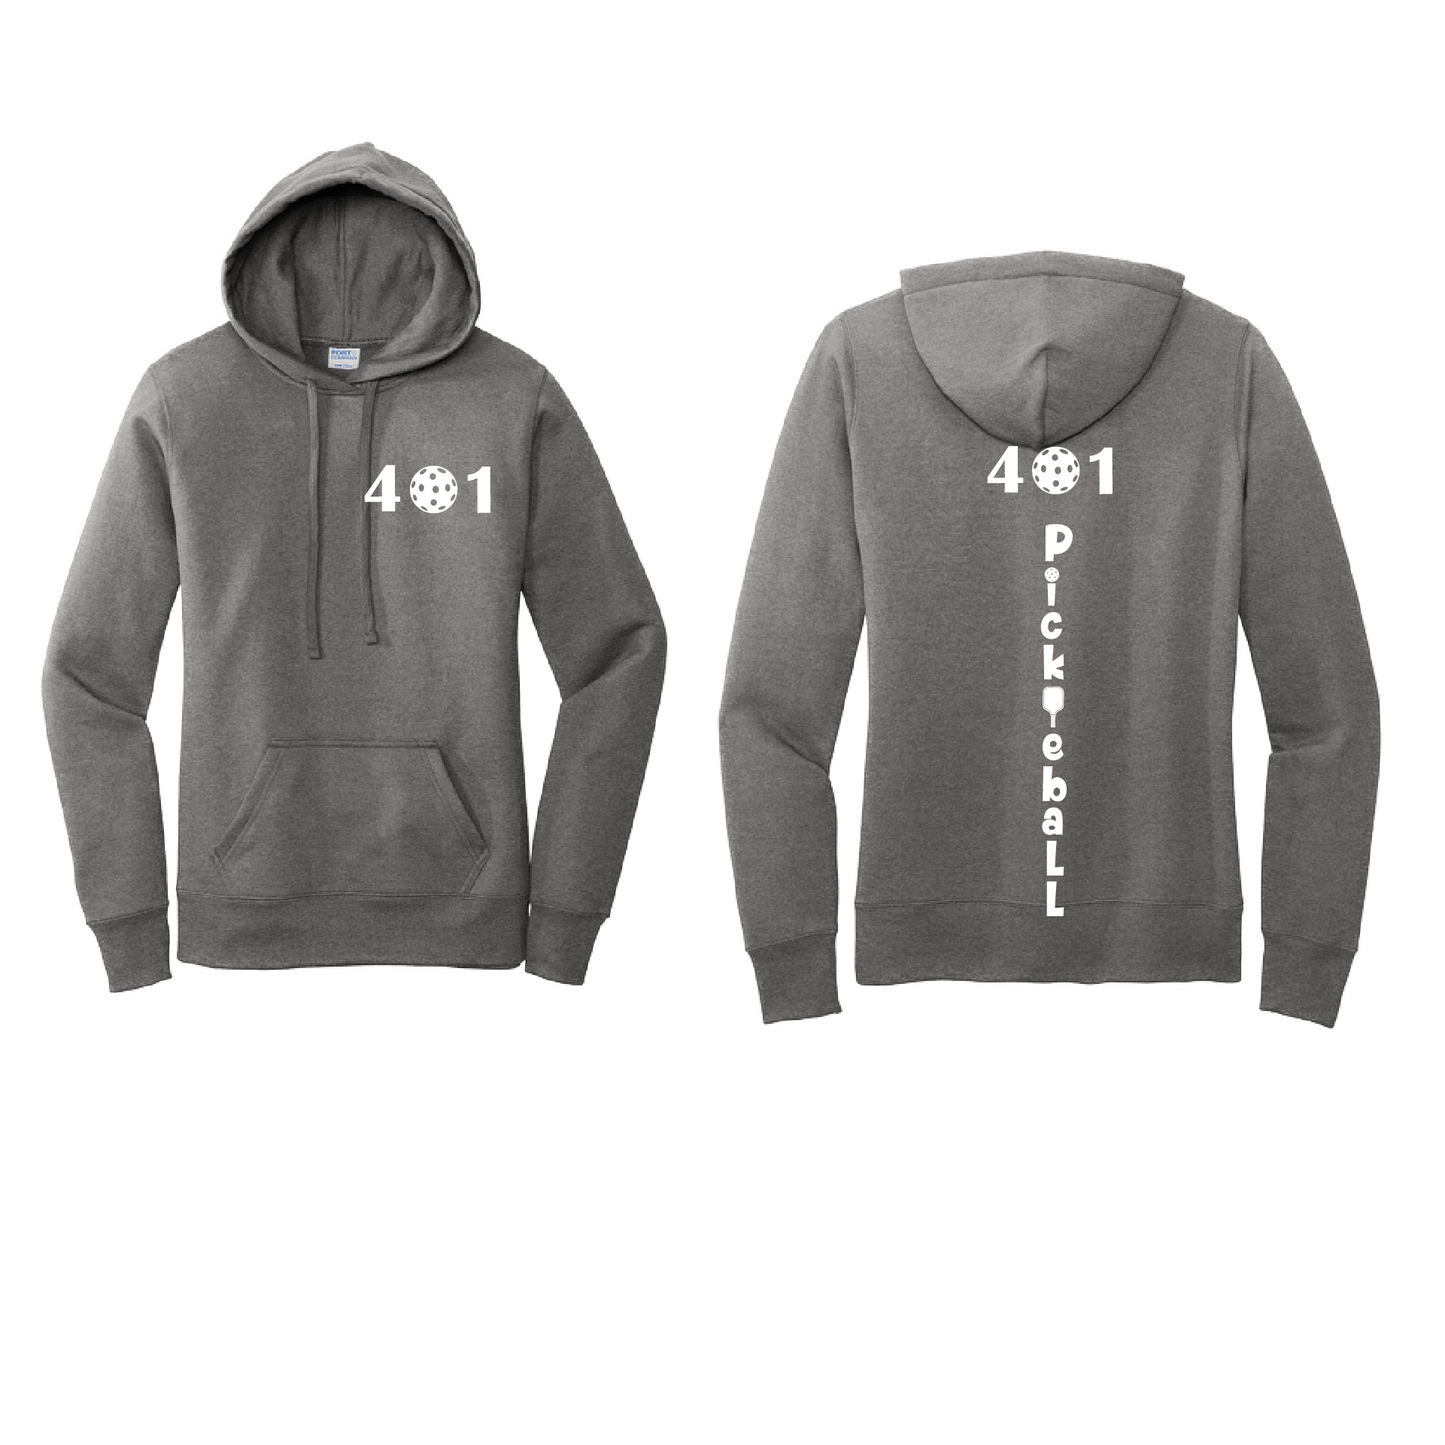 Design: 401 Pickleball  Women's Hooded pullover Sweatshirt: 50/50 Cotton/Poly fleece.   Turn up the volume in this Women's Sweatshirts with its perfect mix of softness and attitude. Ultra soft lined inside with a lined hood also. This is fitted nicely for a women's figure. Front pouch pocket.